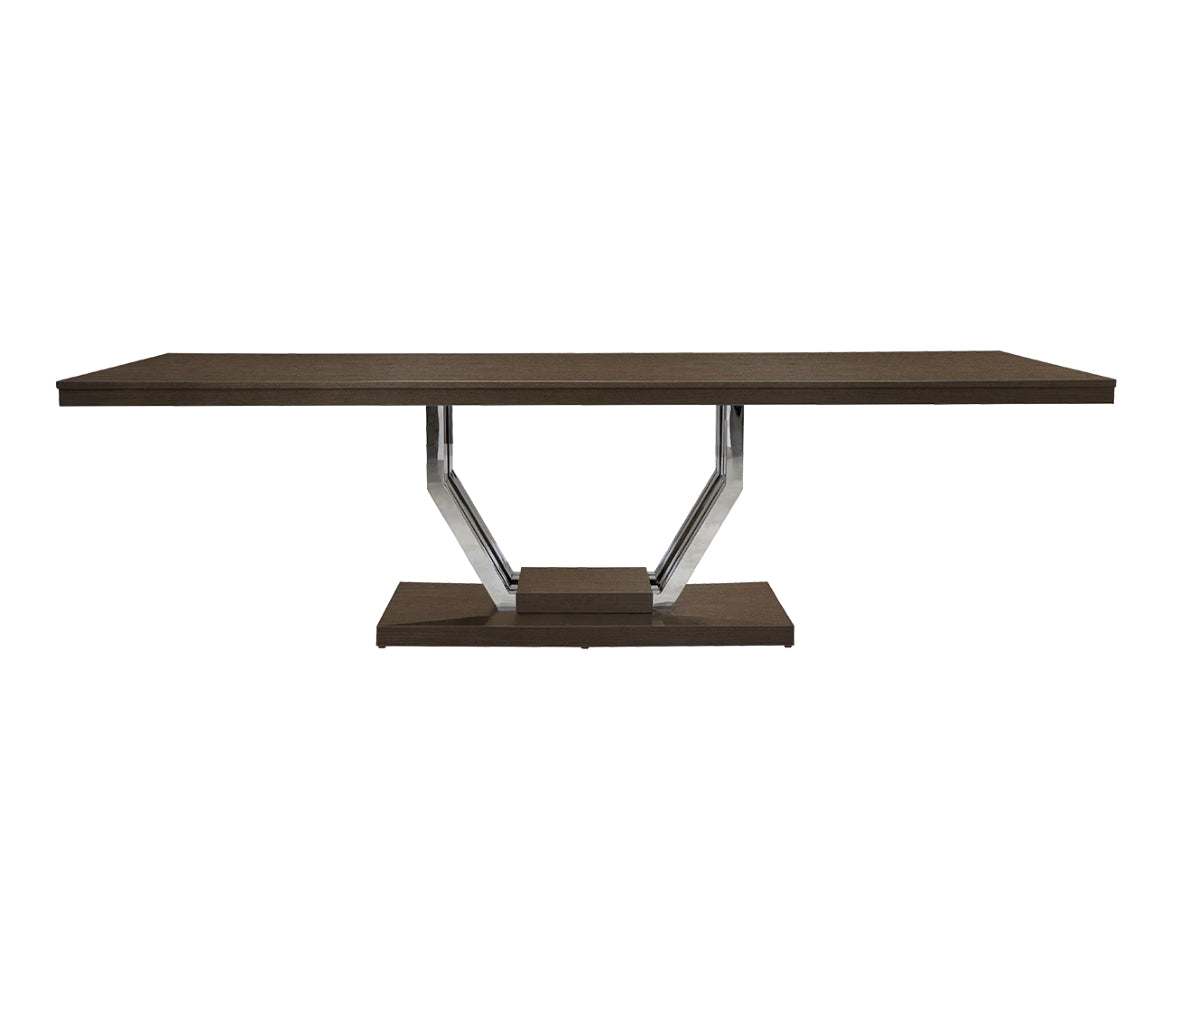 Playa 105" Brown Pearl Wood Dining Table - Polished Stainless Steel Base